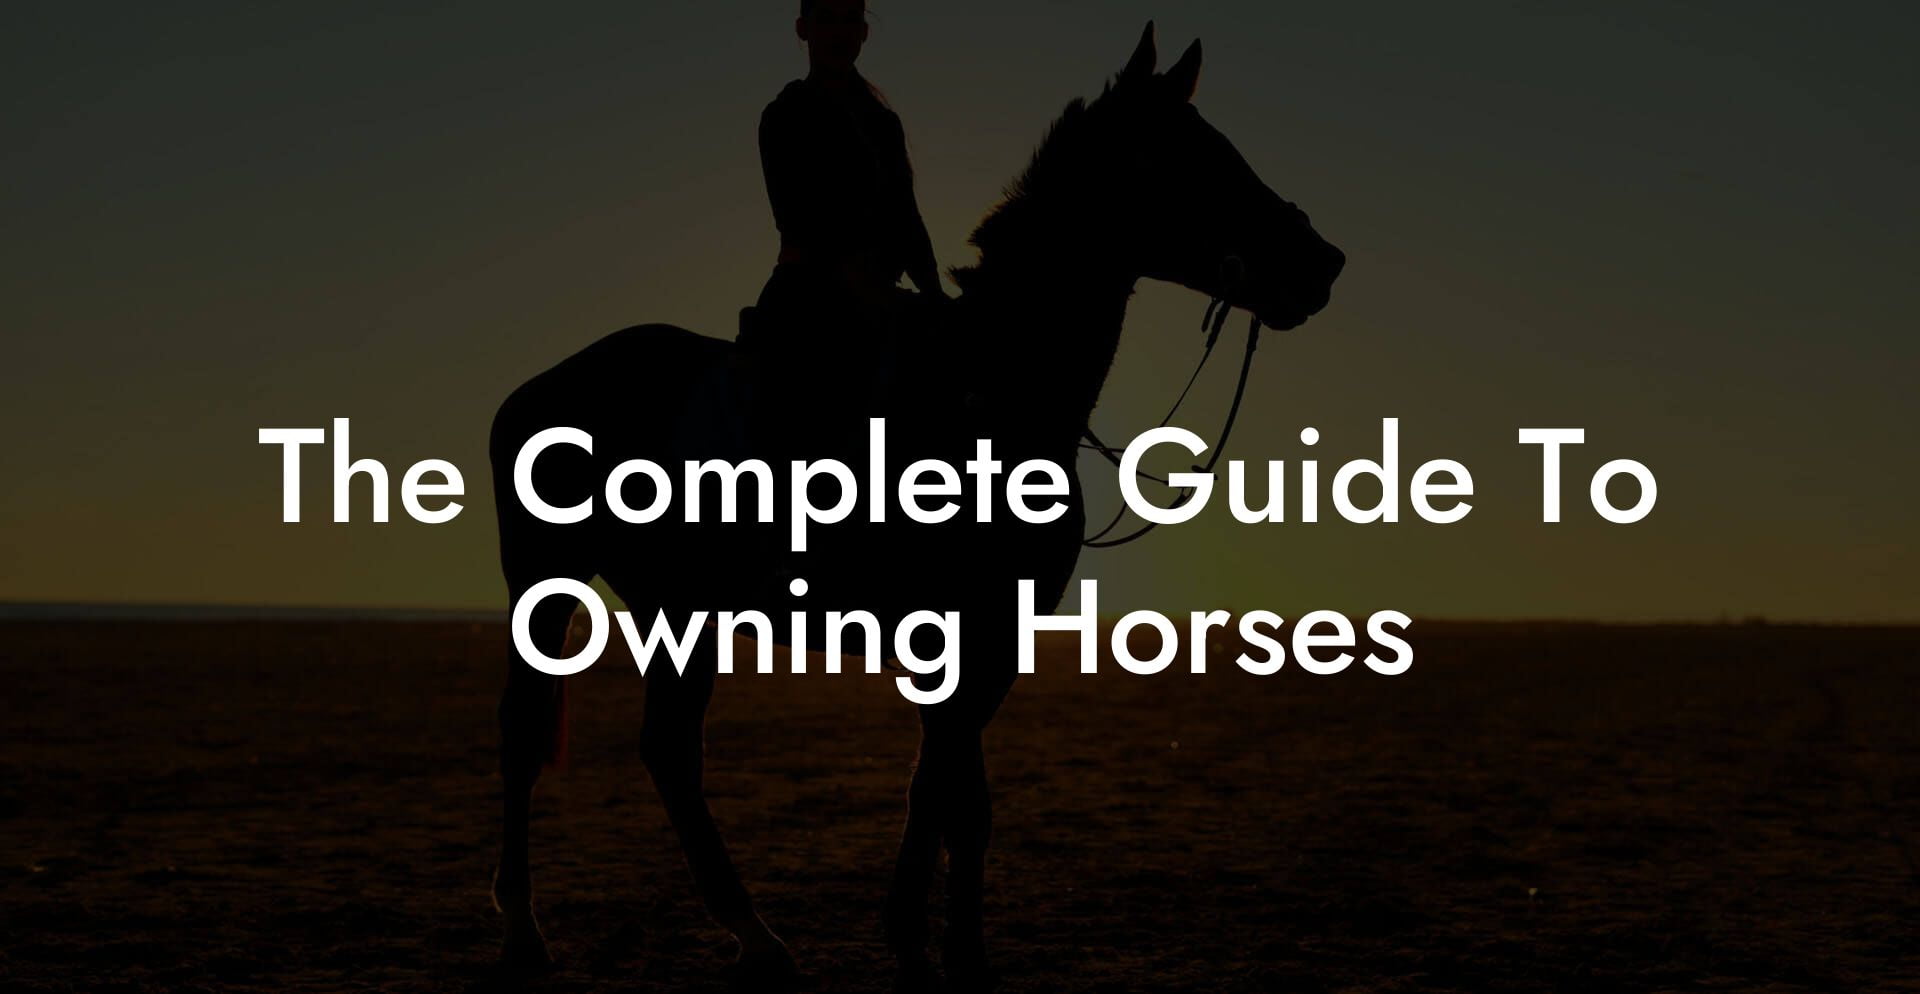 The Complete Guide To Owning Horses